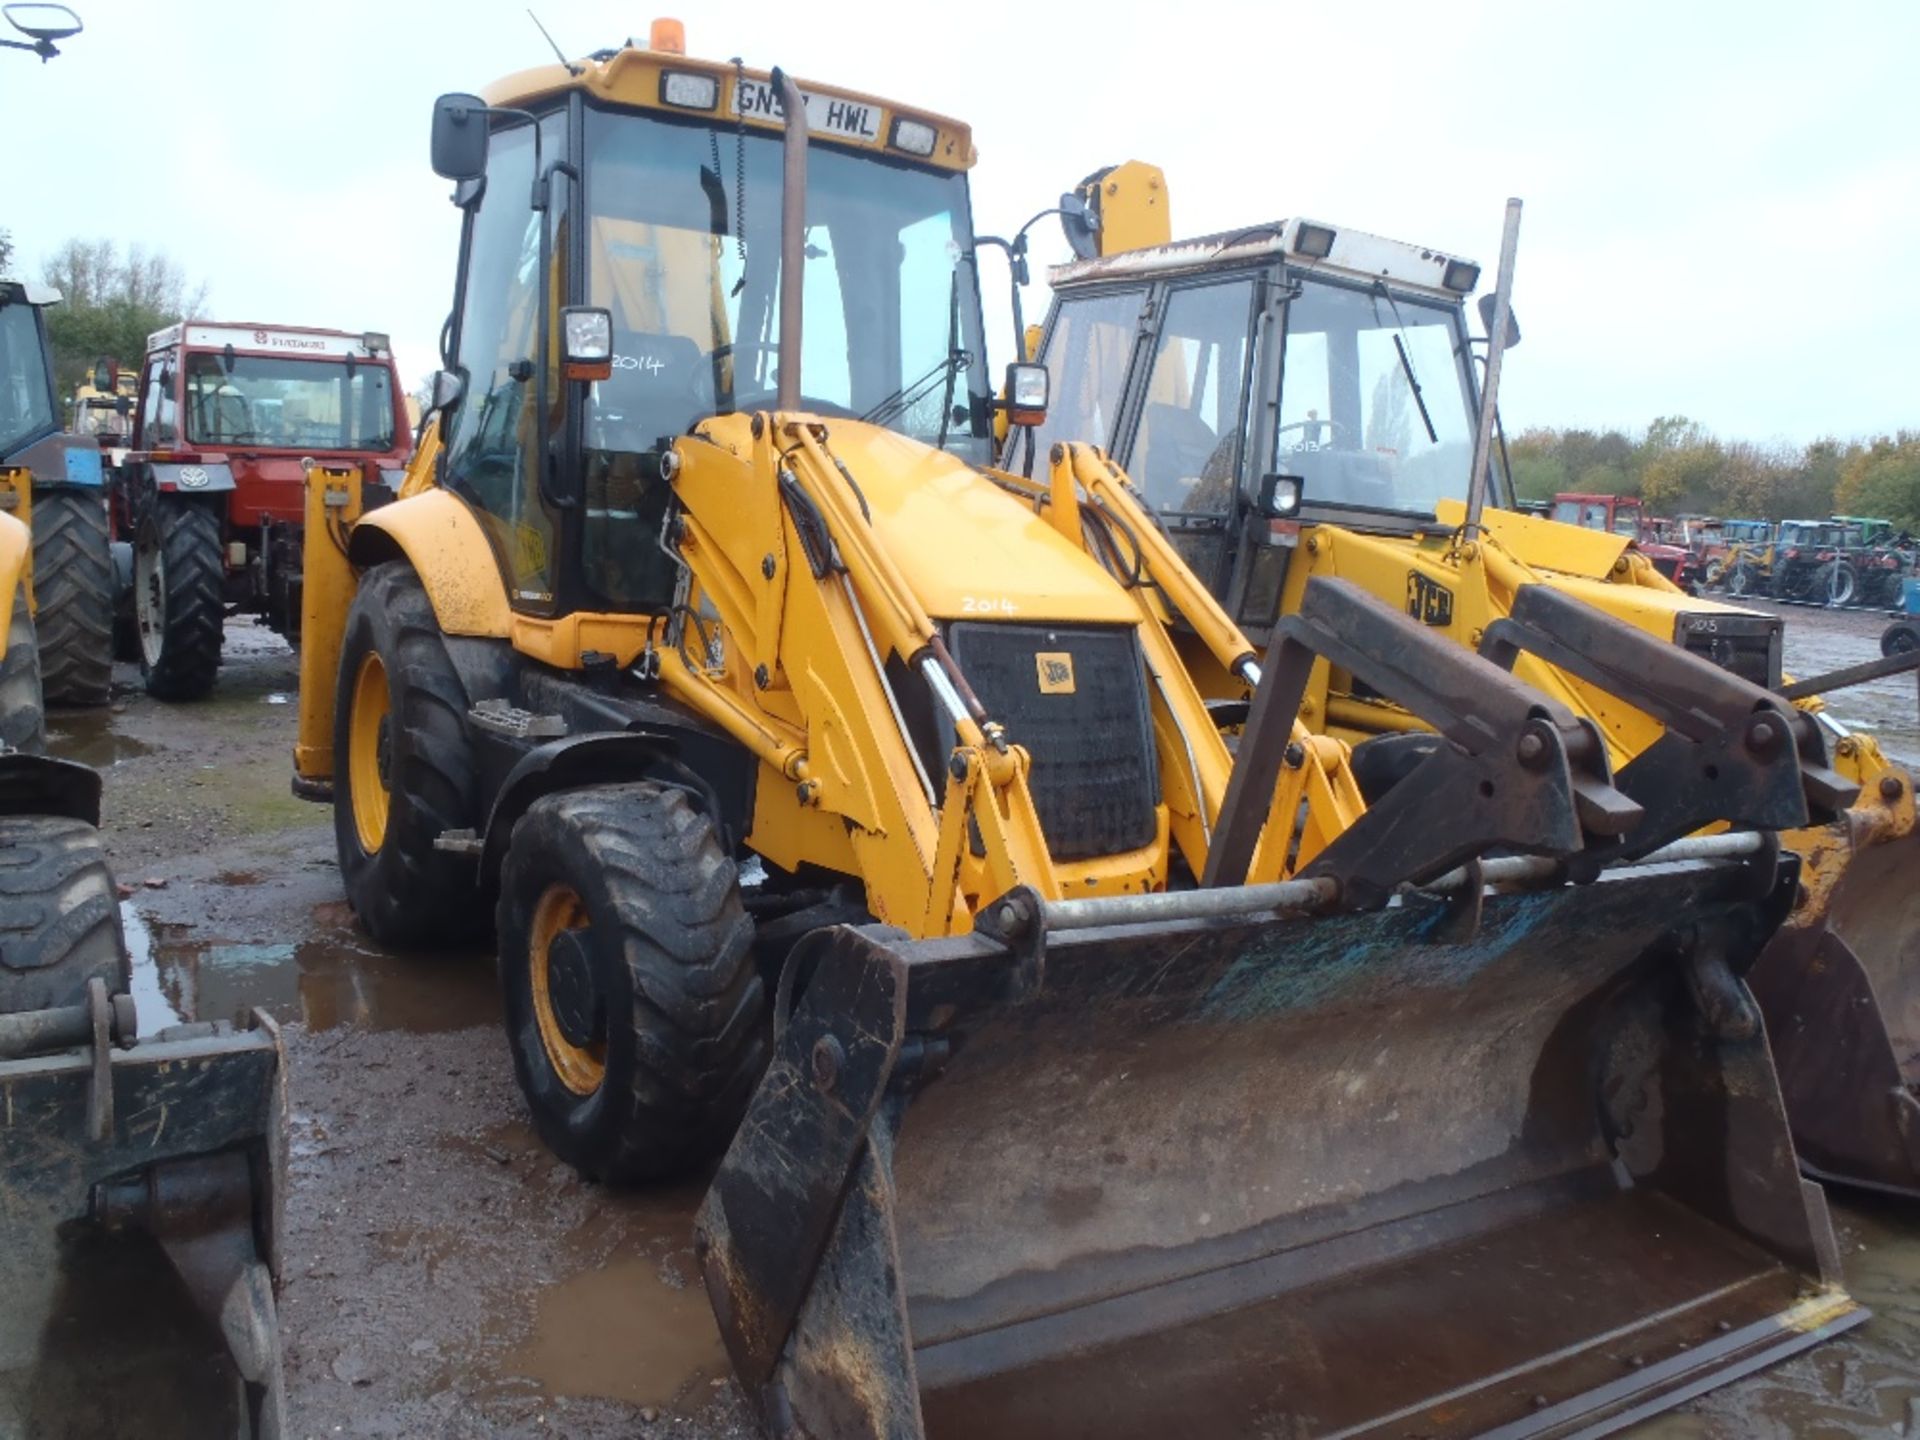 2008 JCB 3CX Sitemaster 4x4 with 4 in 1 Bucket, Extending Dipper Arm & Quick Hitch. V5 will be - Image 2 of 5